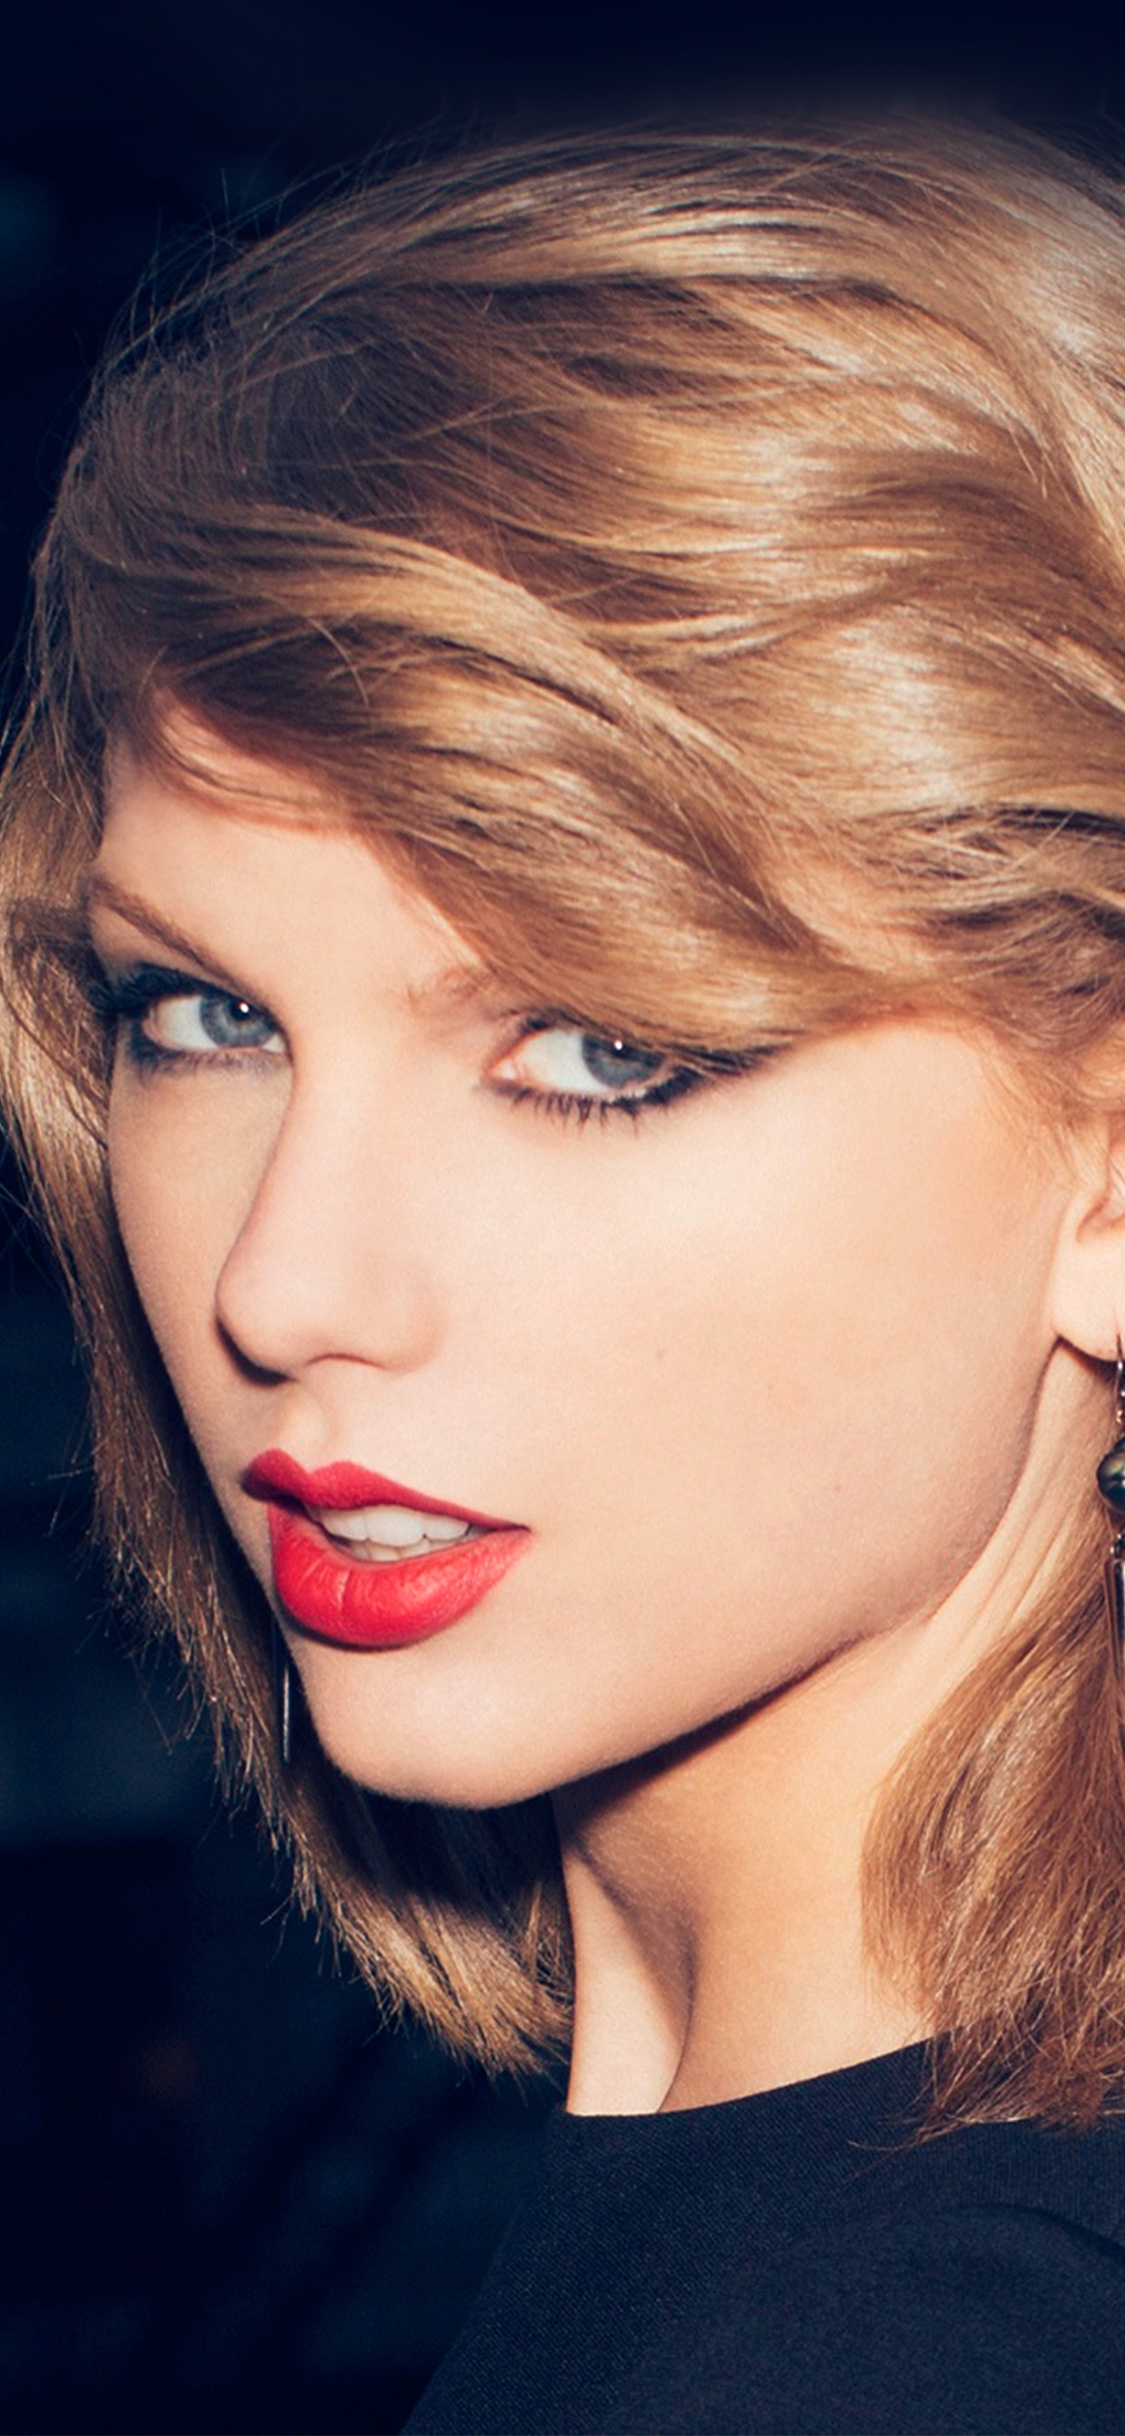 taylor swift iphone wallpaper,hair,face,eyebrow,lip,hairstyle